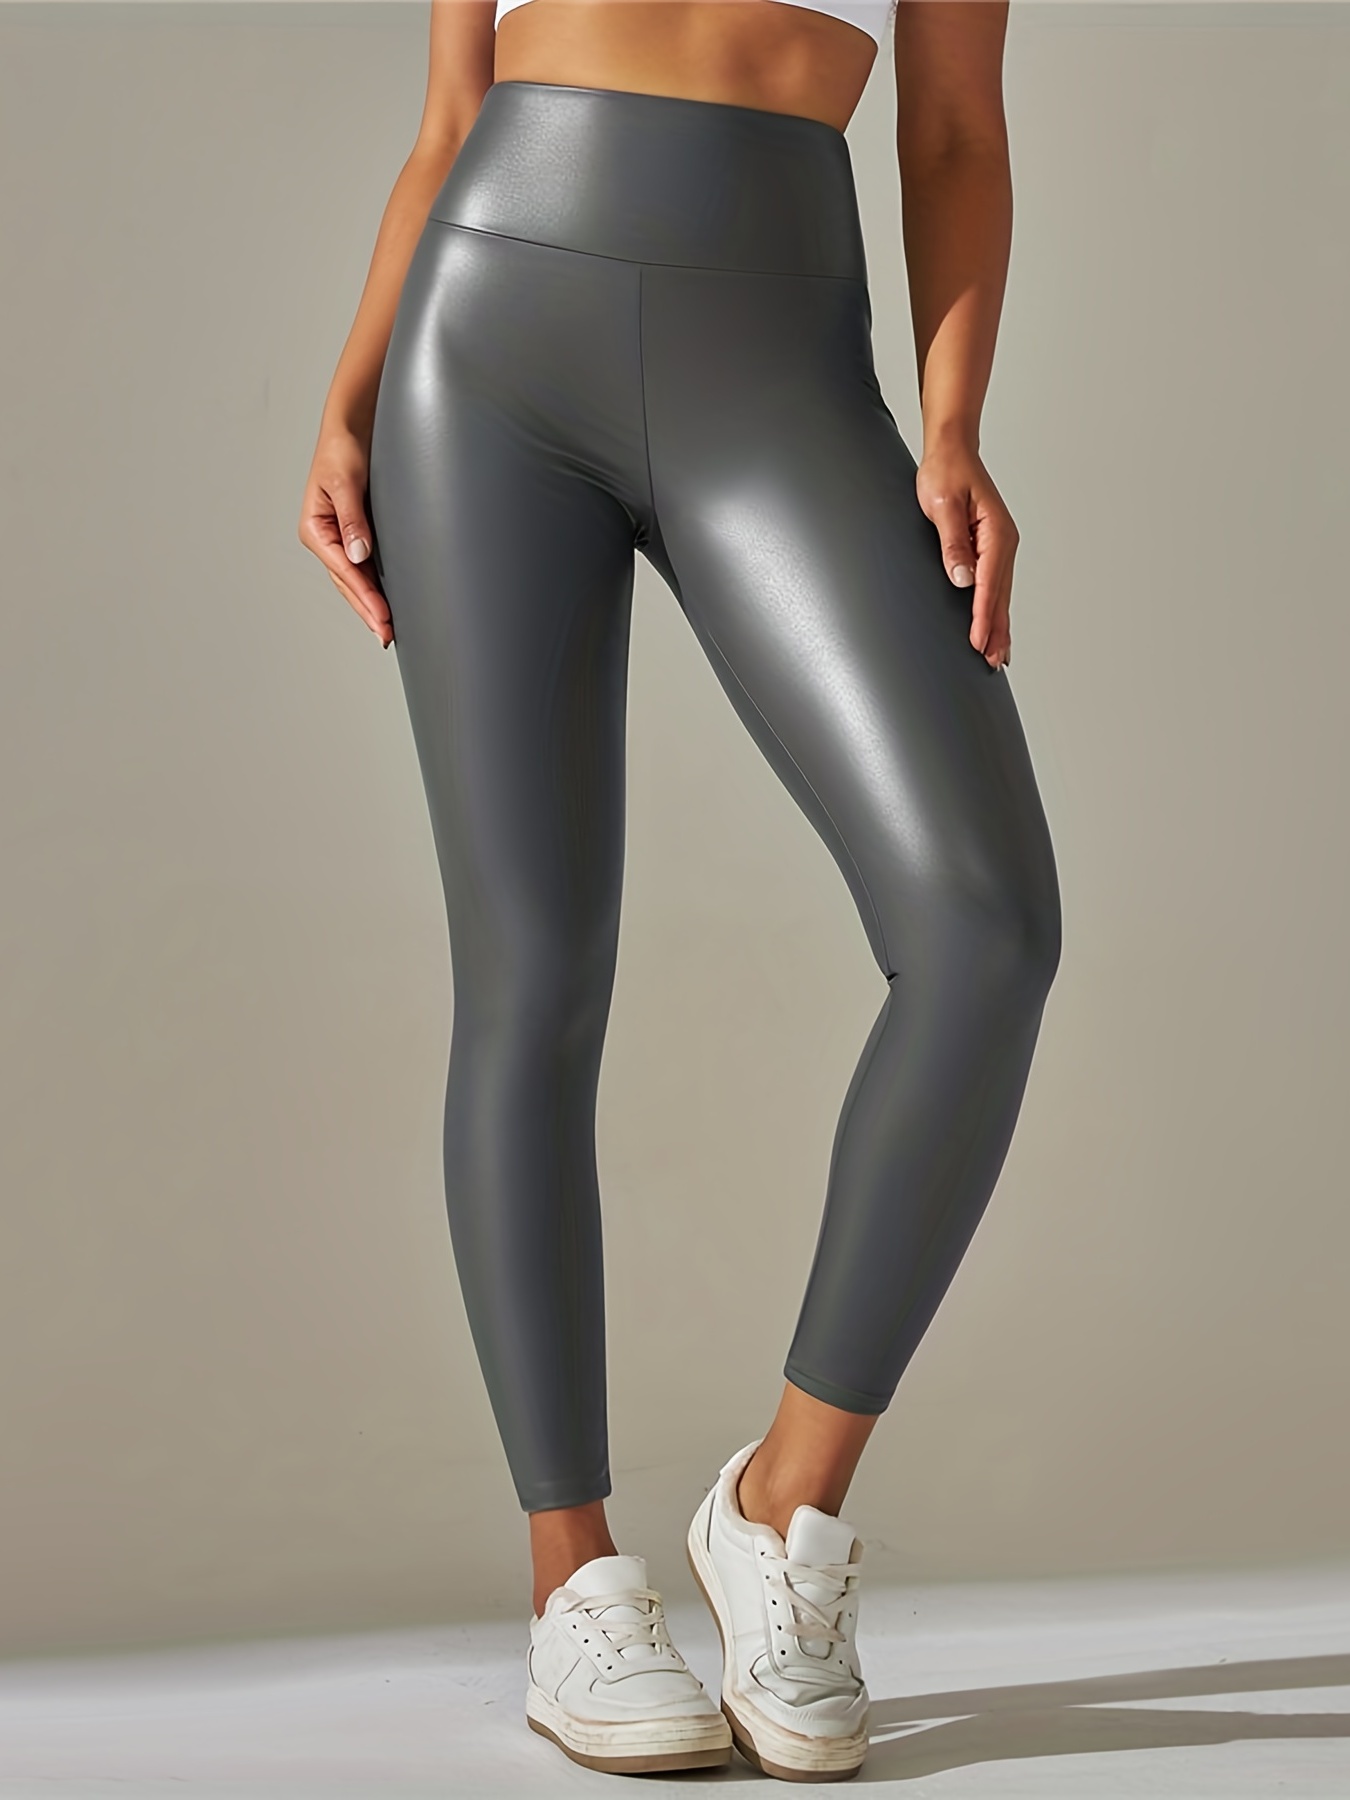 Sexy High Waisted Bodycon High Waisted Leather Leggings For Women Shiny PU  Leather, Flesh PVC, Latex Stretchy, Slim Fit, Perfect For Summer Size 4XL  Style #230811 From Kai02, $28.49